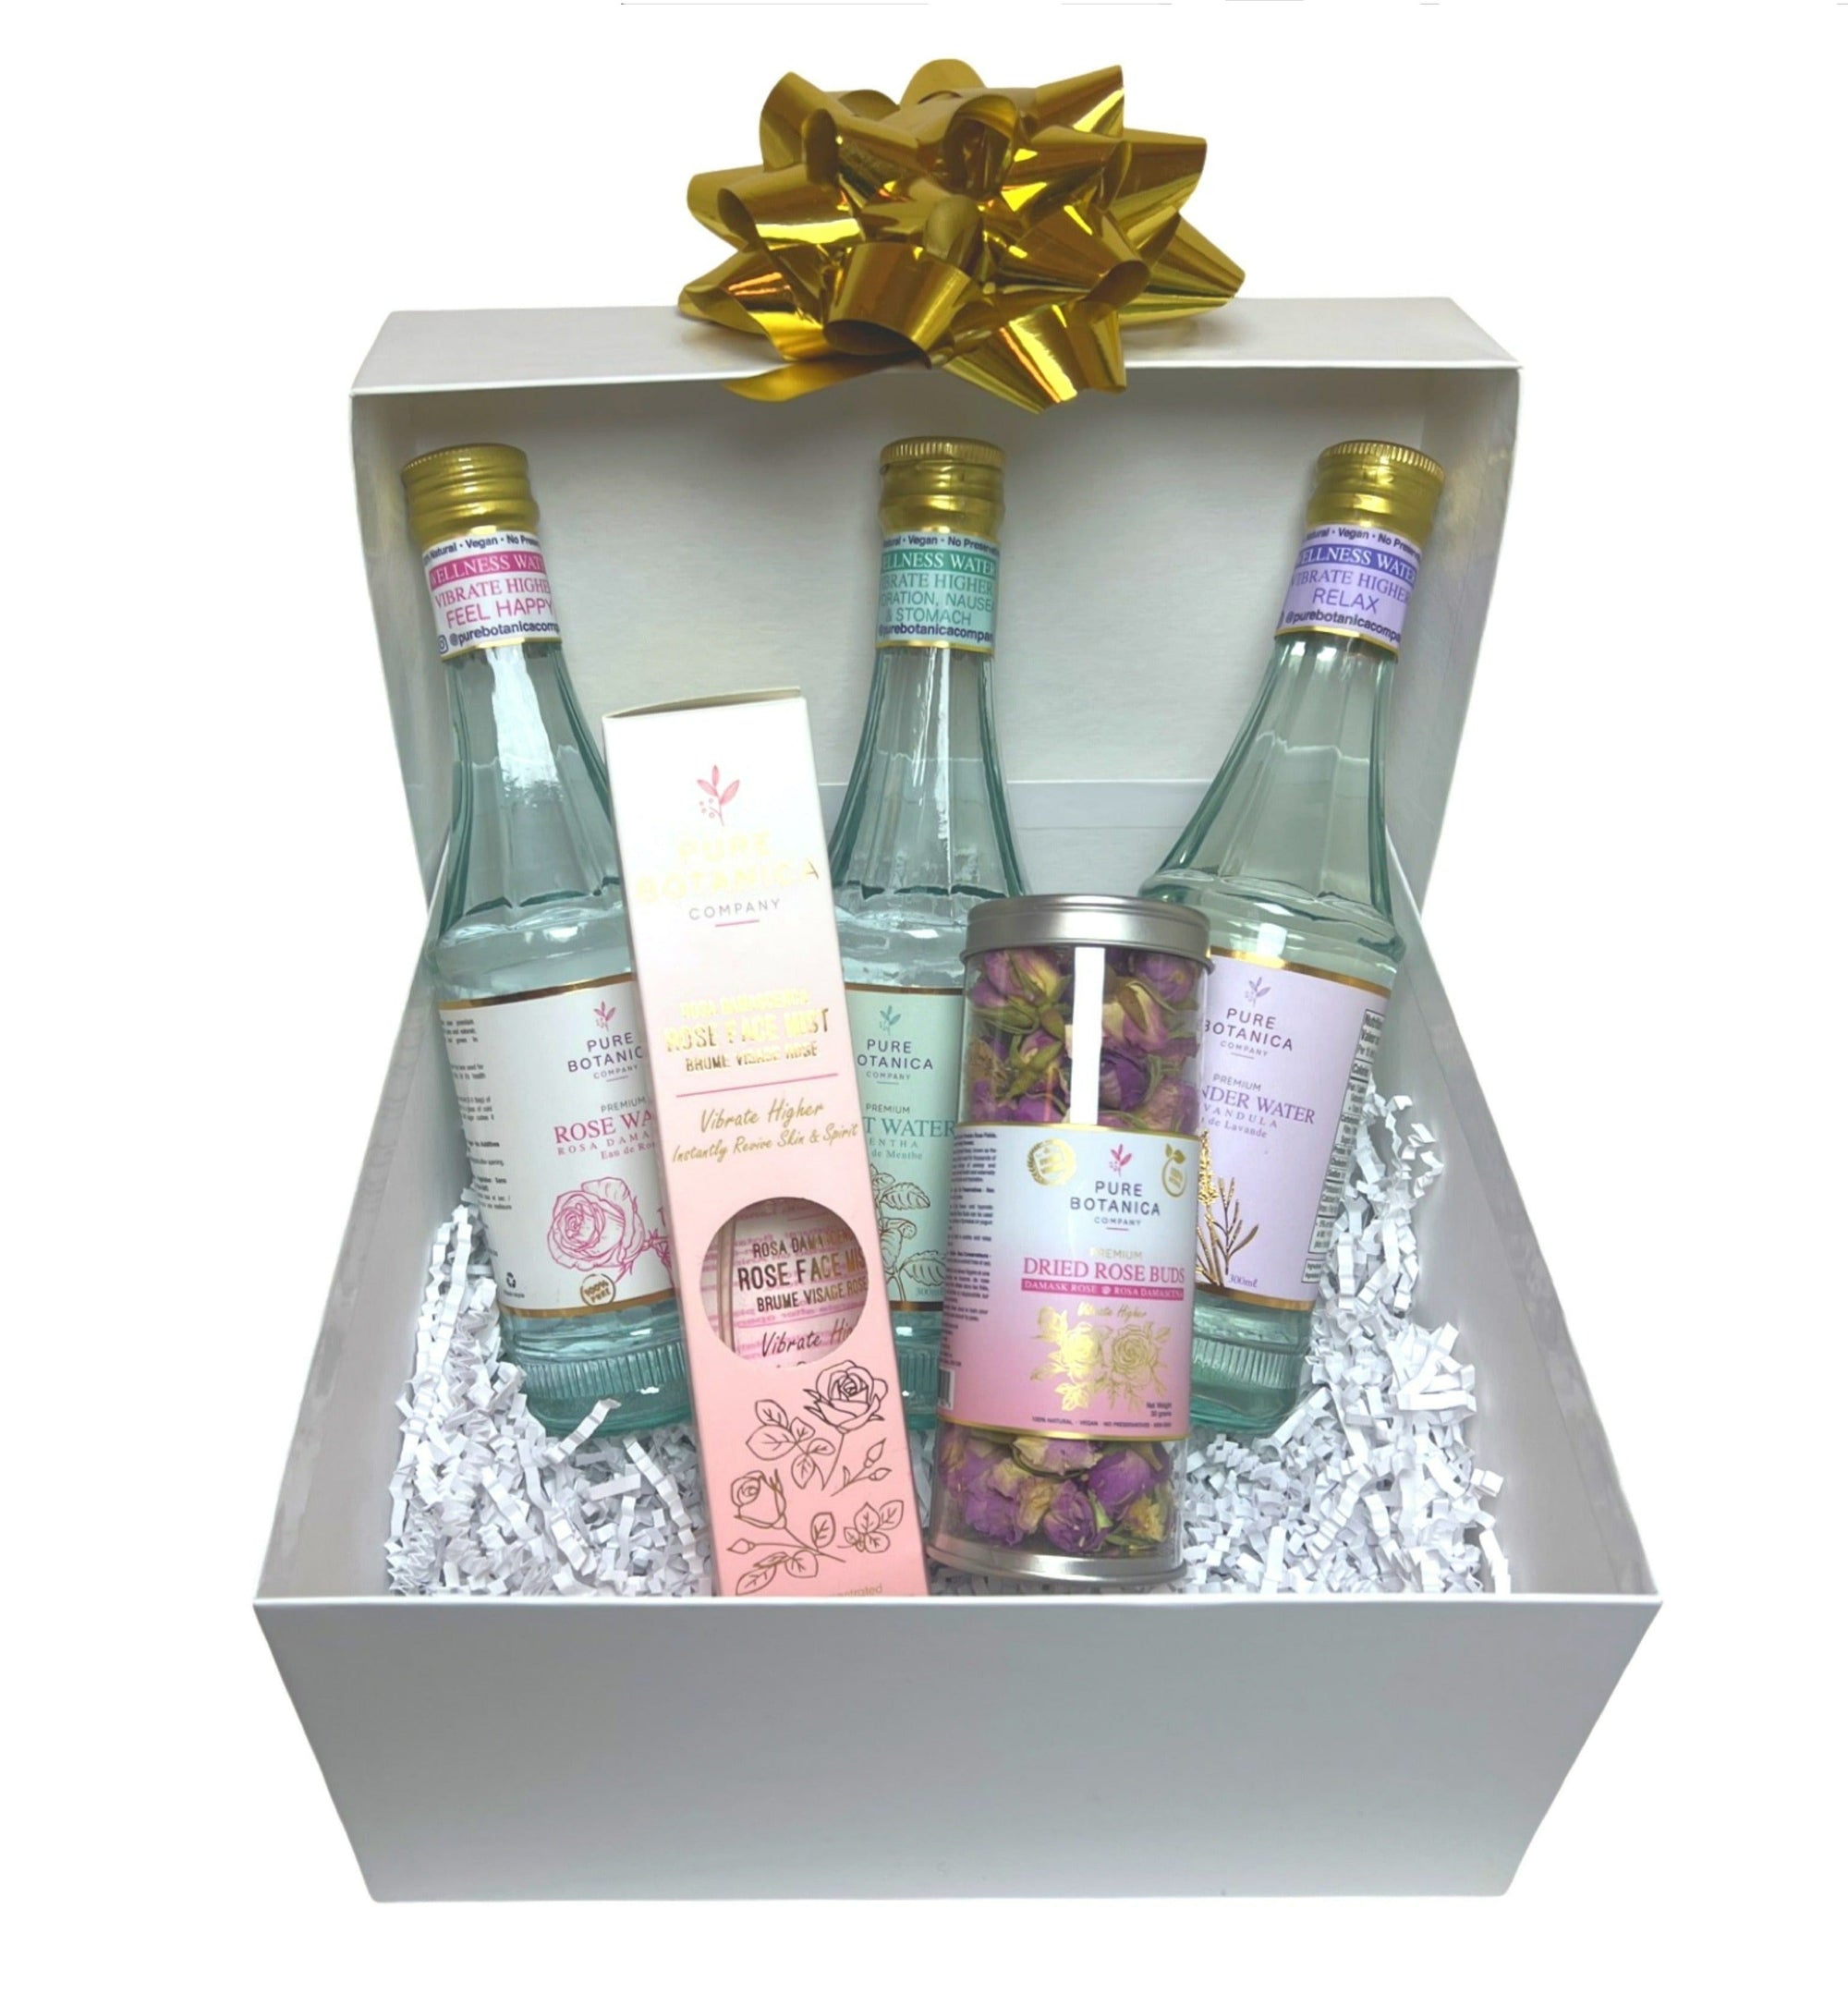 Luxurious Gift Collection of Botanicals